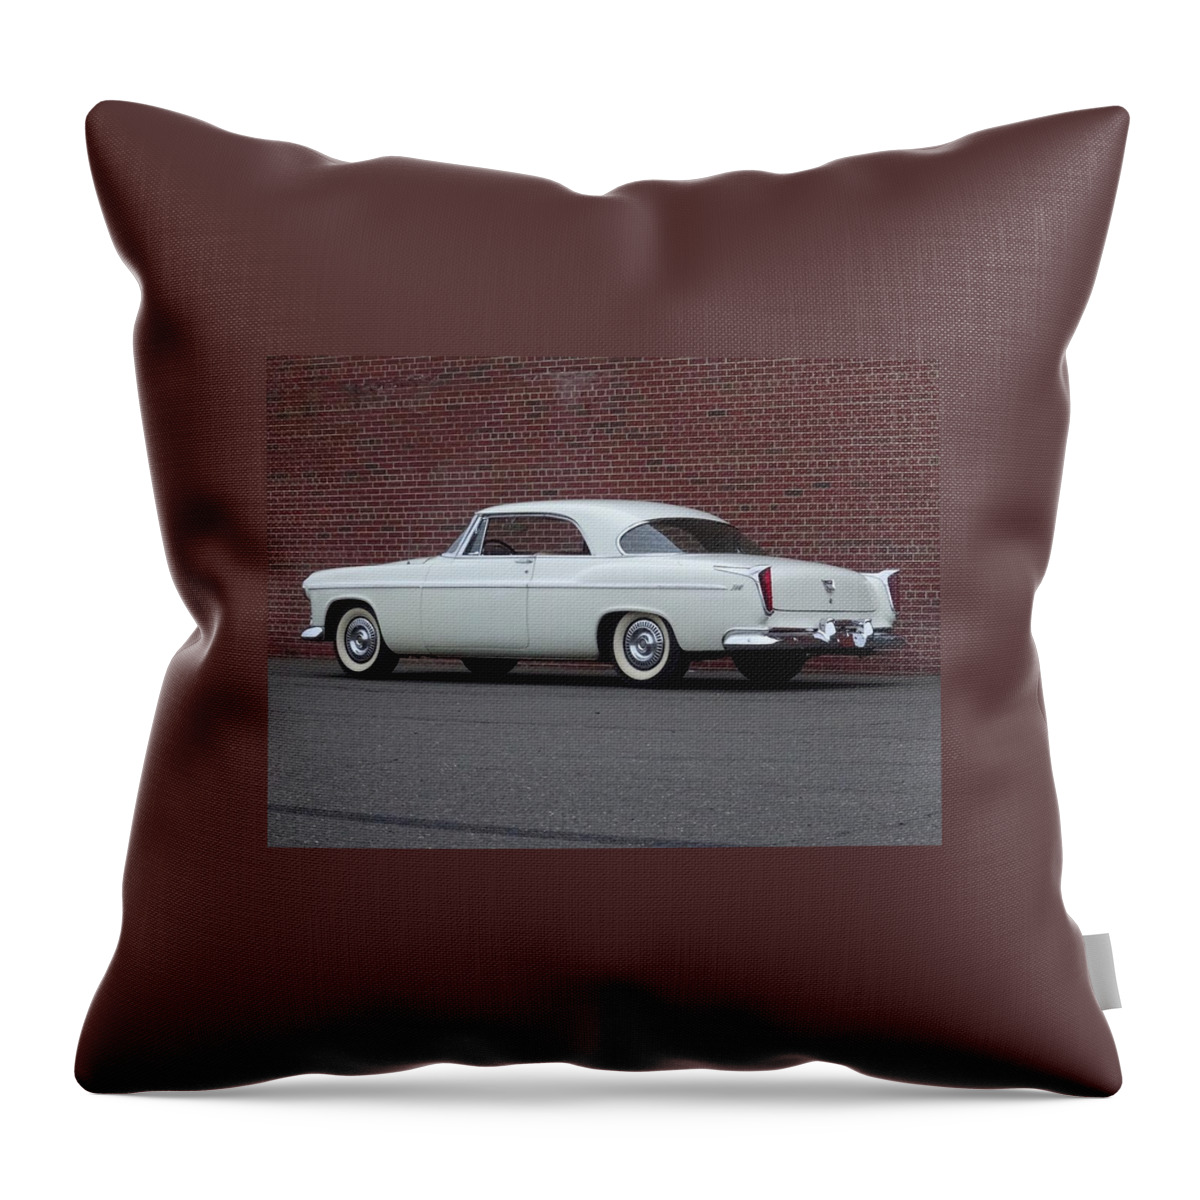 Chrysler C-300 Throw Pillow featuring the photograph Chrysler C-300 by Jackie Russo